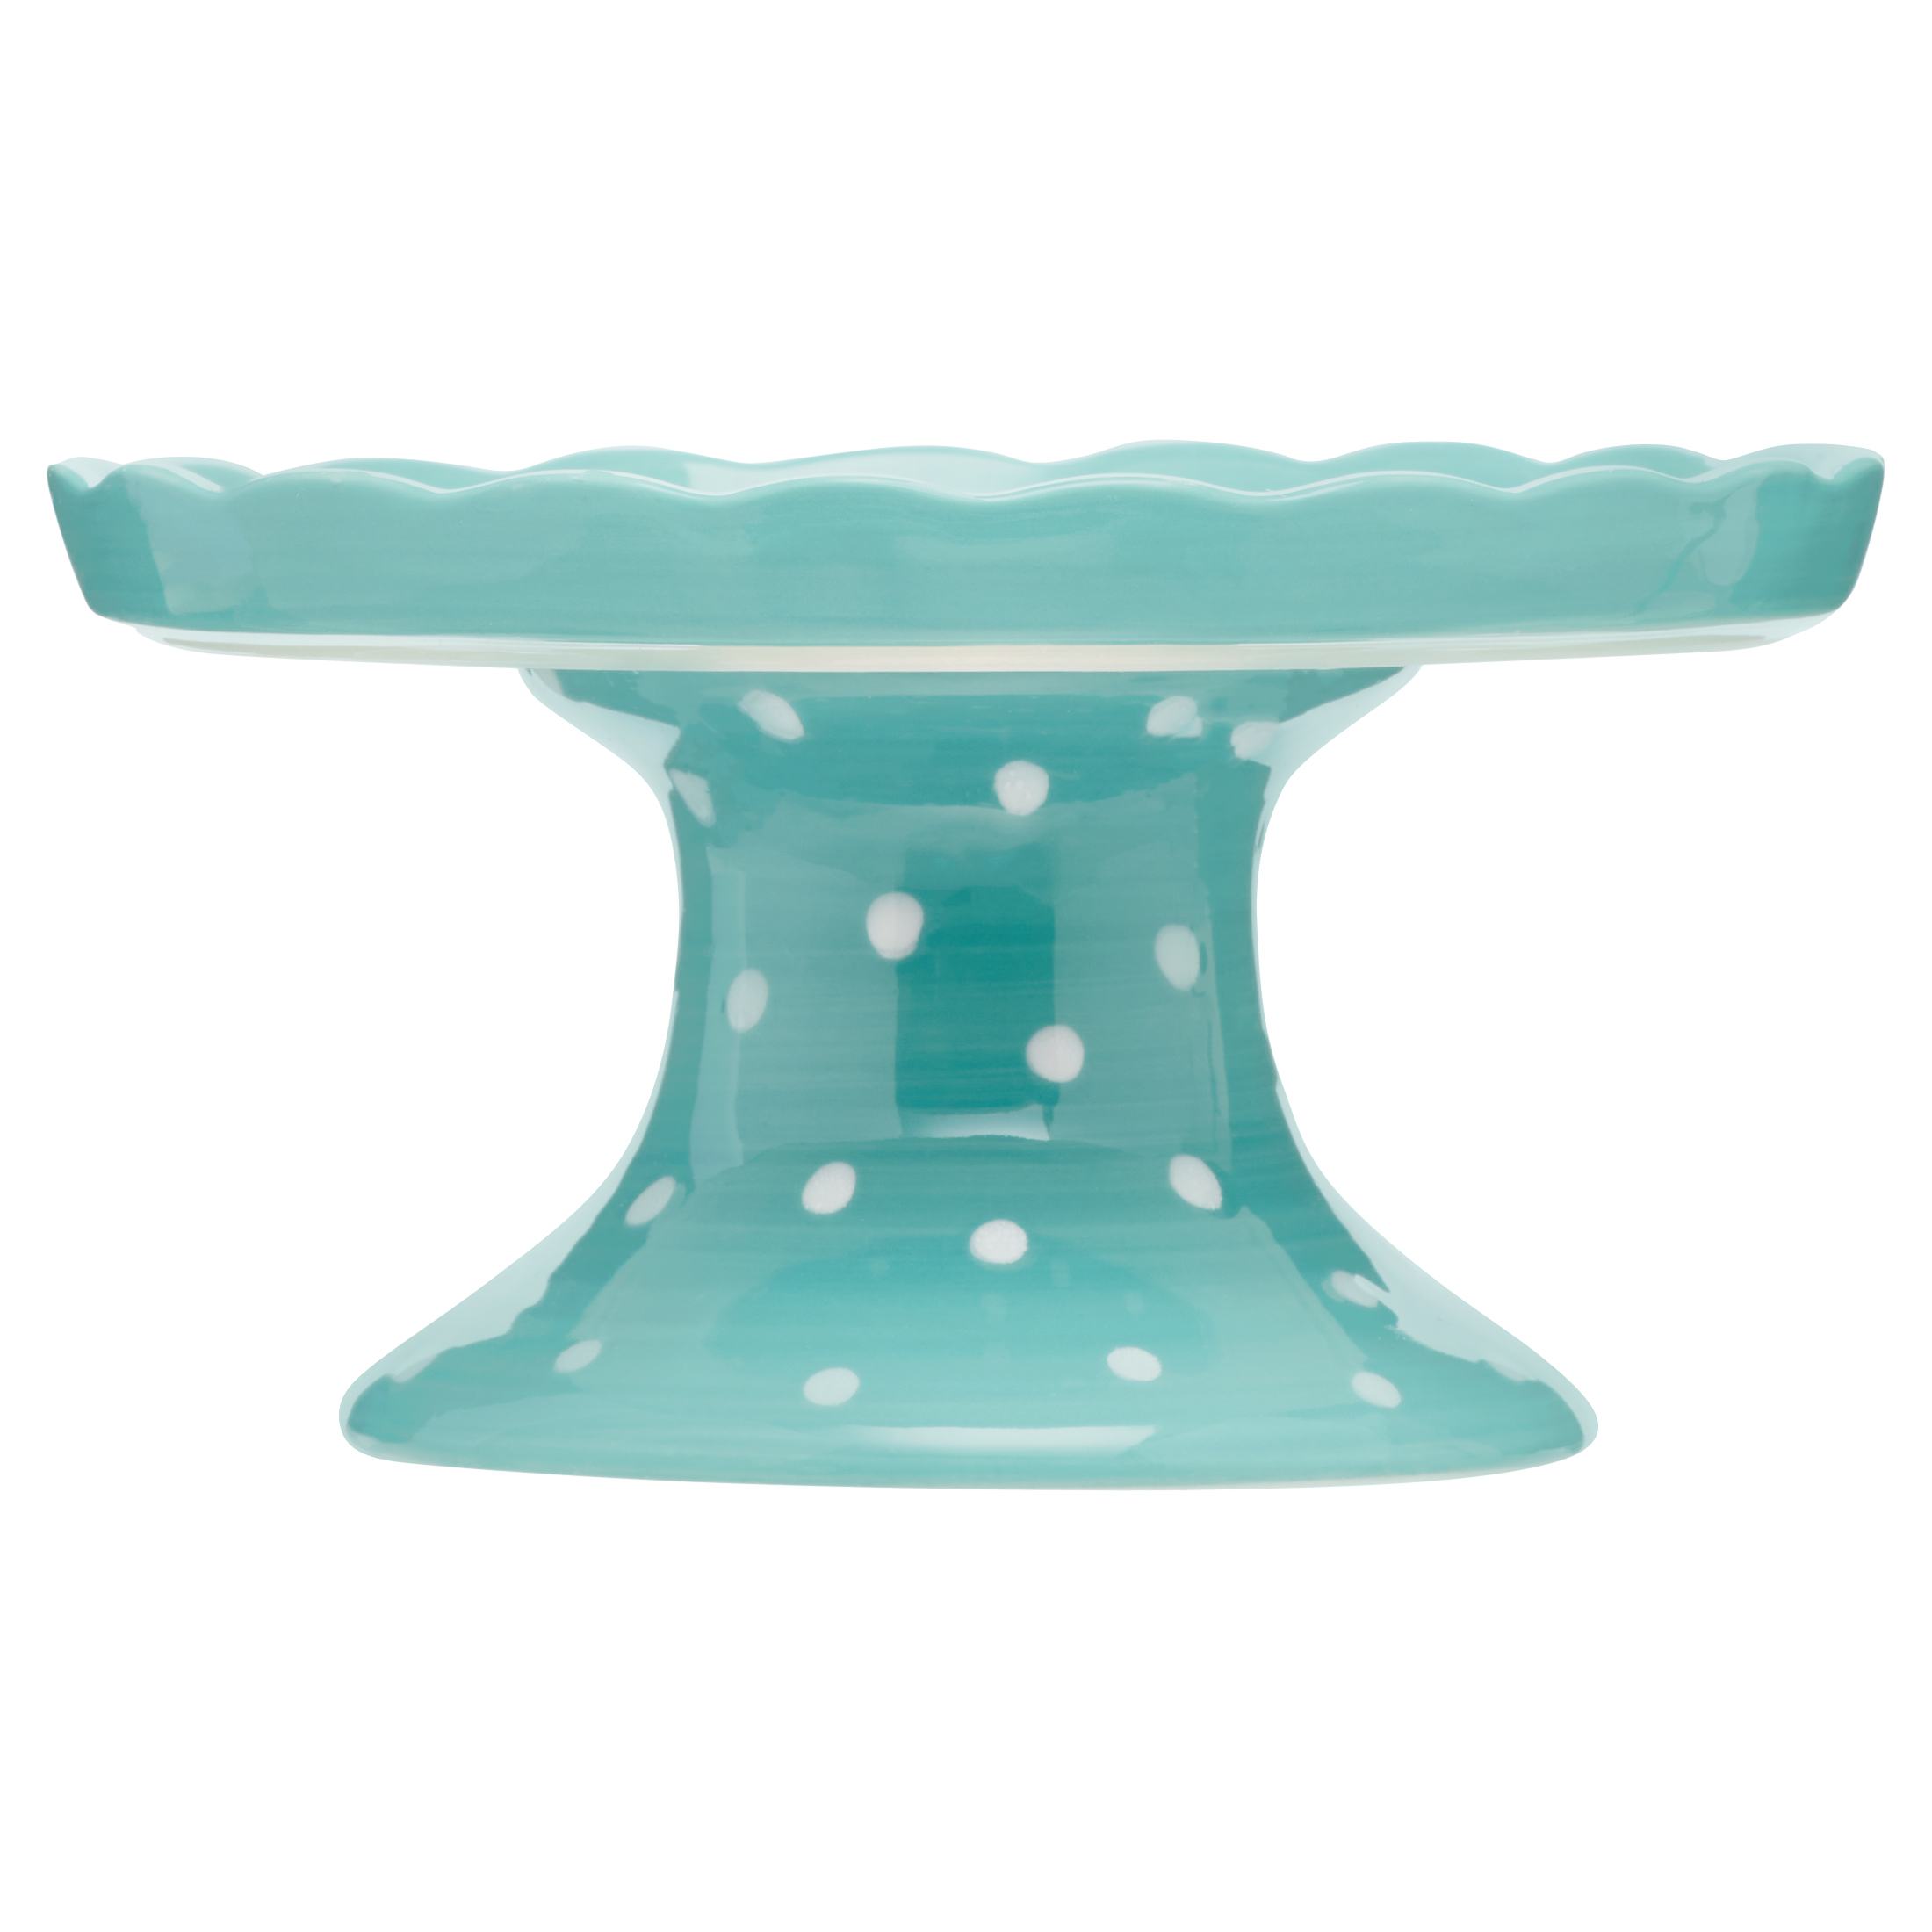 The Pioneer Woman 9.5 in x 10.2 in Ceramic/Glass Dinner Party/Birthday Cupcake Stand, Ceramic - image 5 of 8